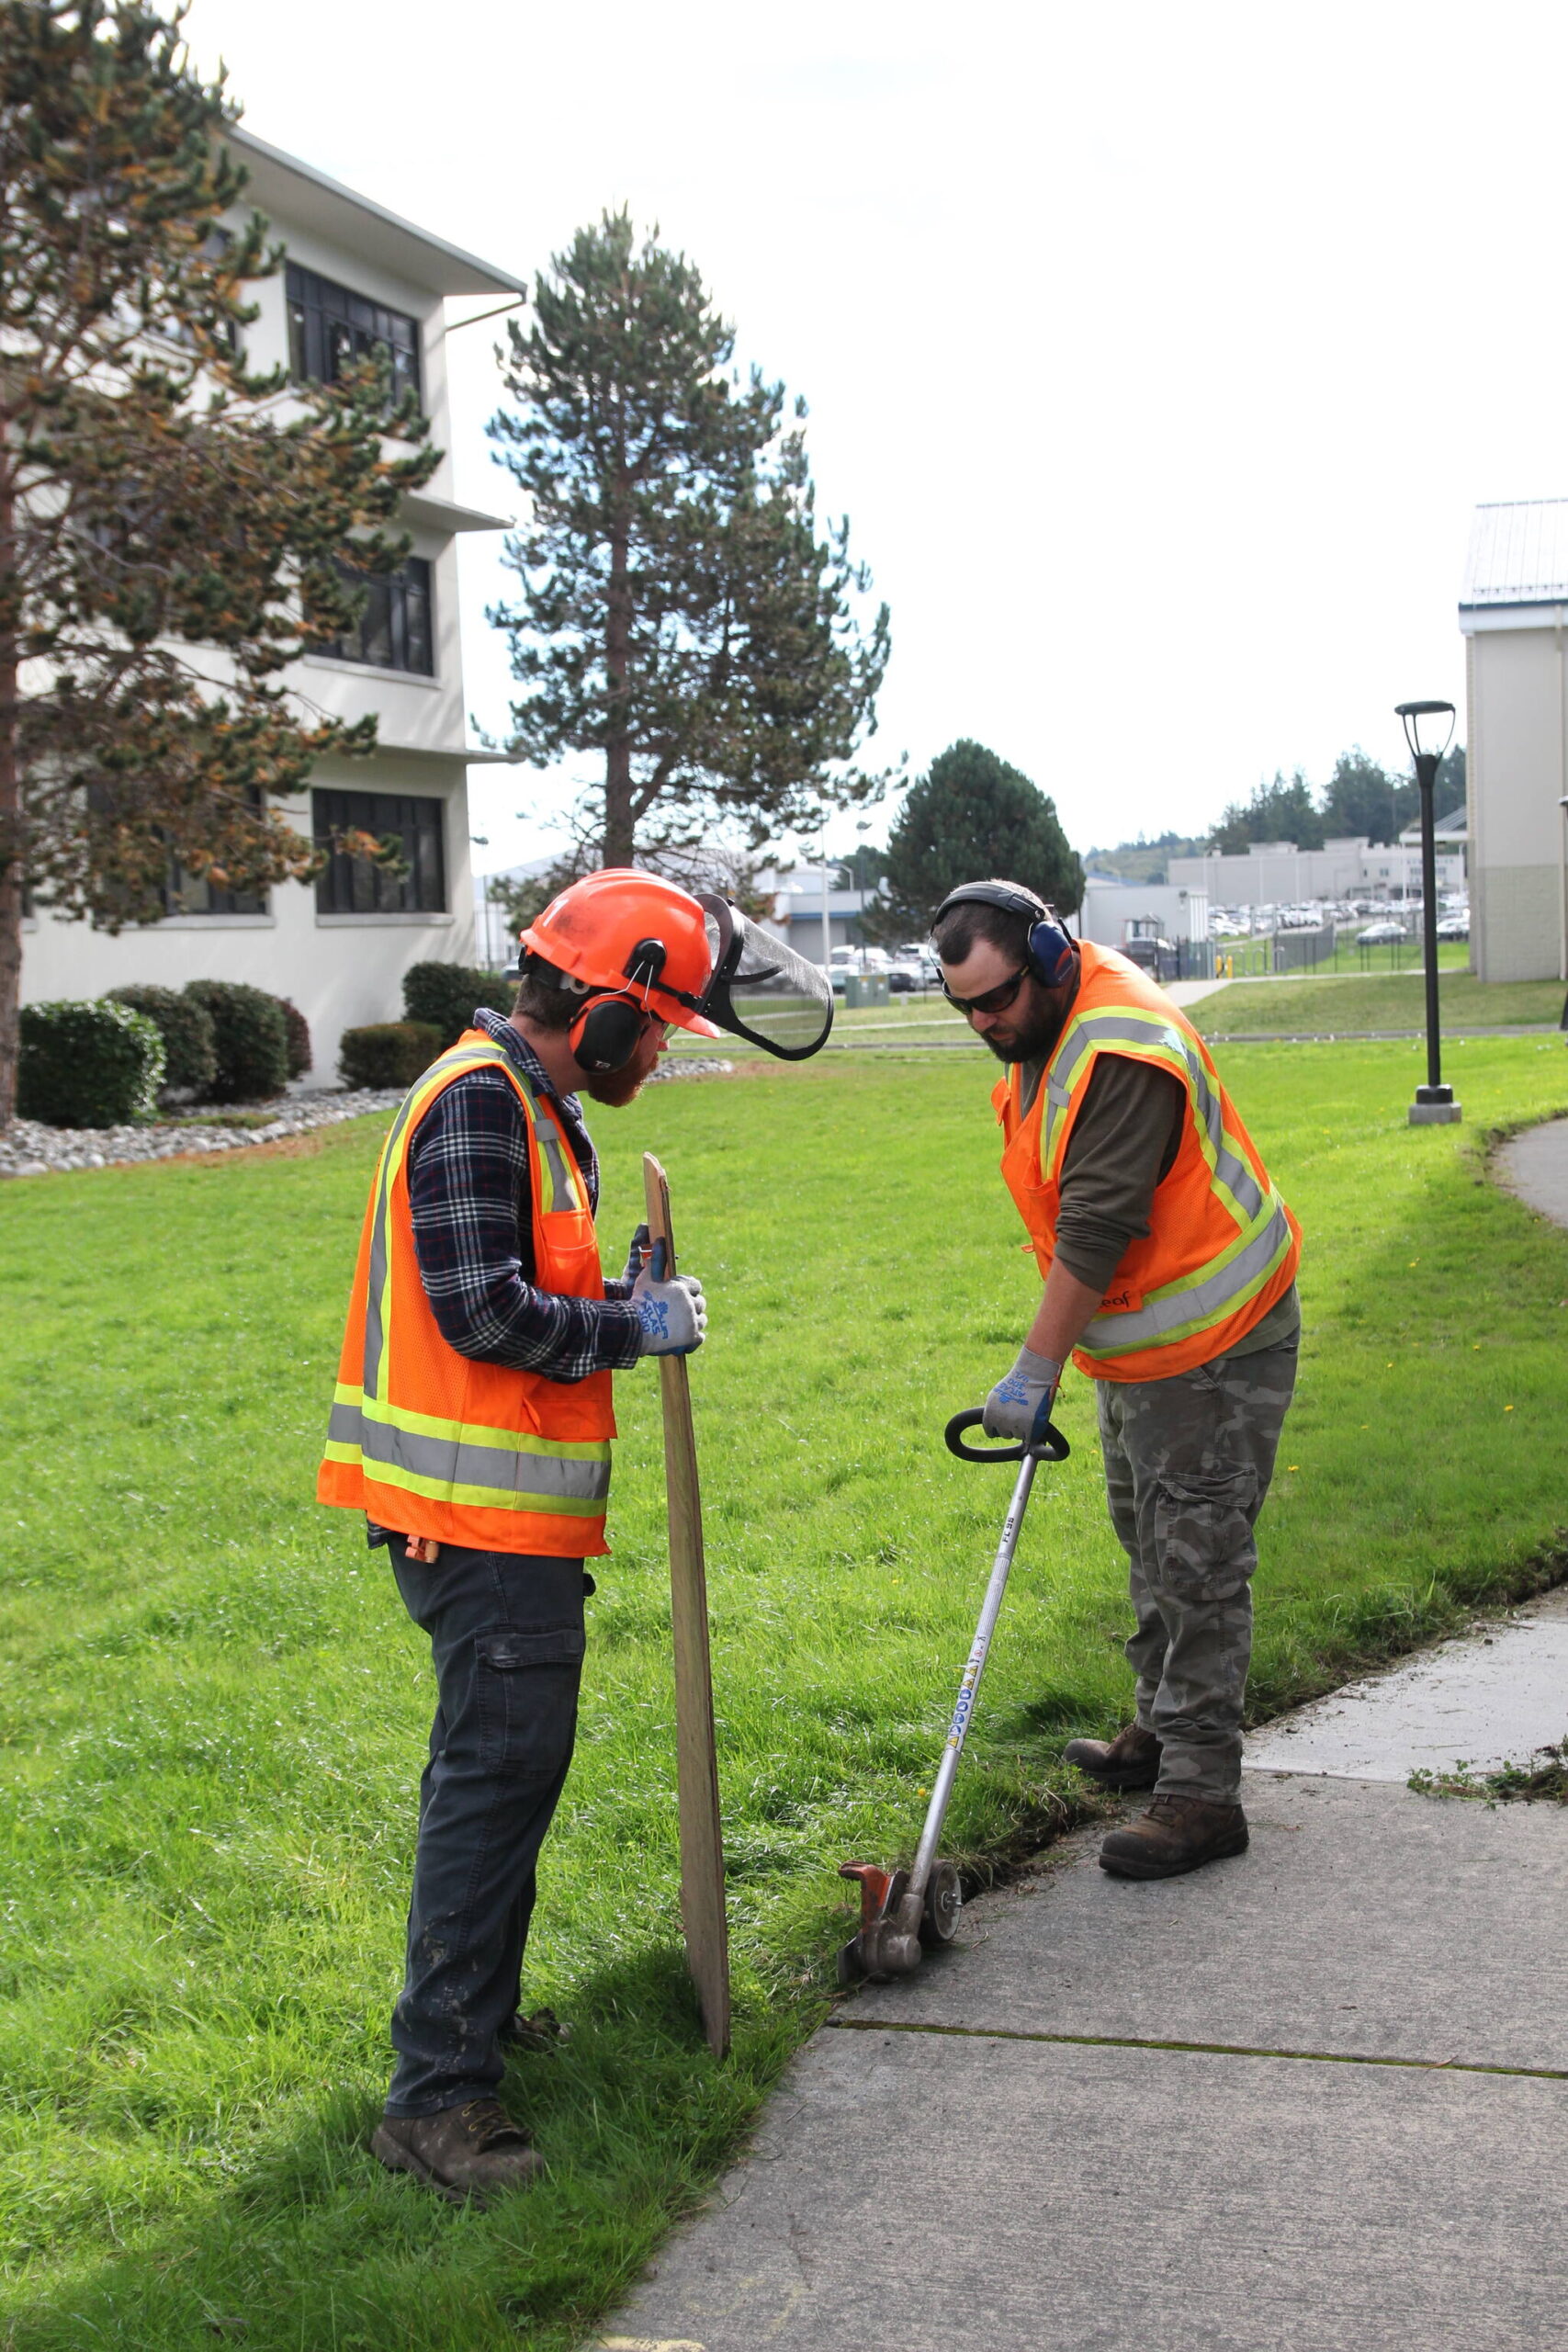 New Leaf’s unsung heroes work behind the scenes | Whidbey News-Times